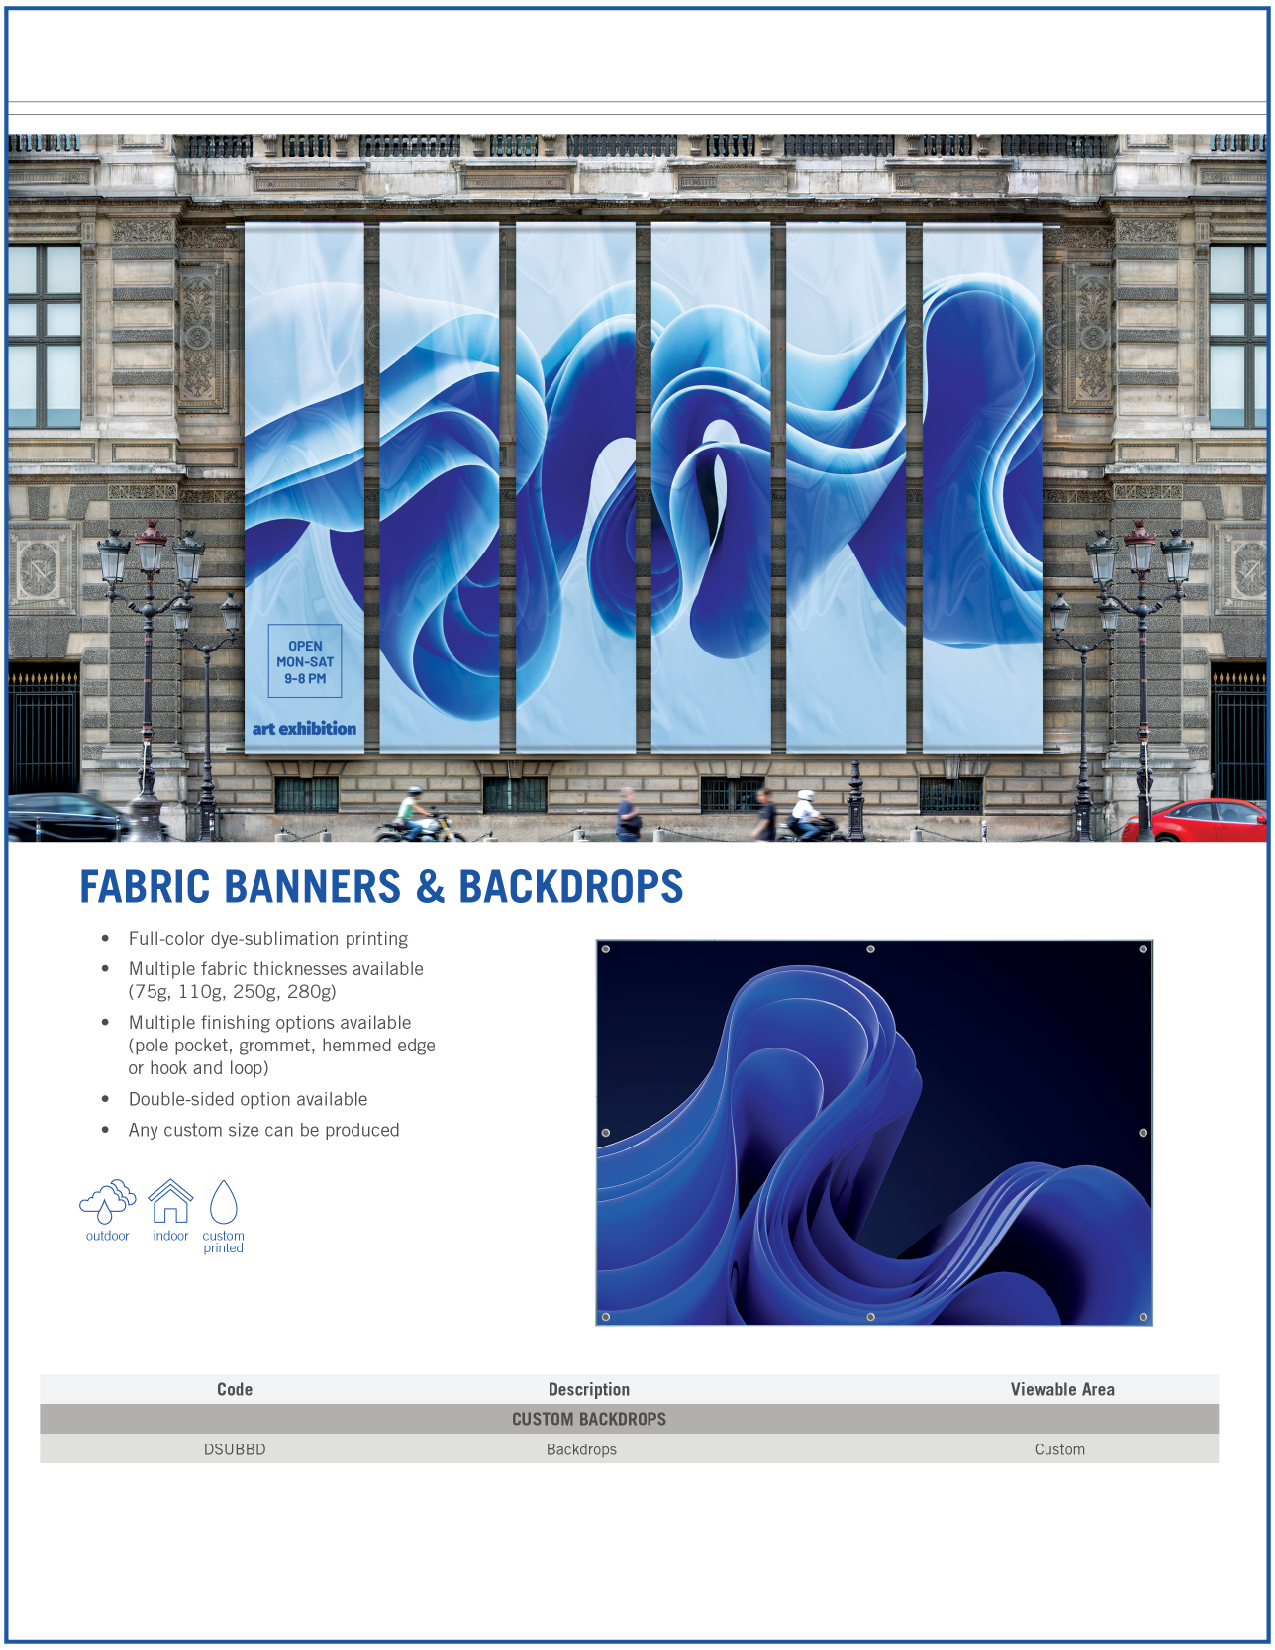 Link to our Fabric Banners and Backdrops Unbranded Sales Flyer